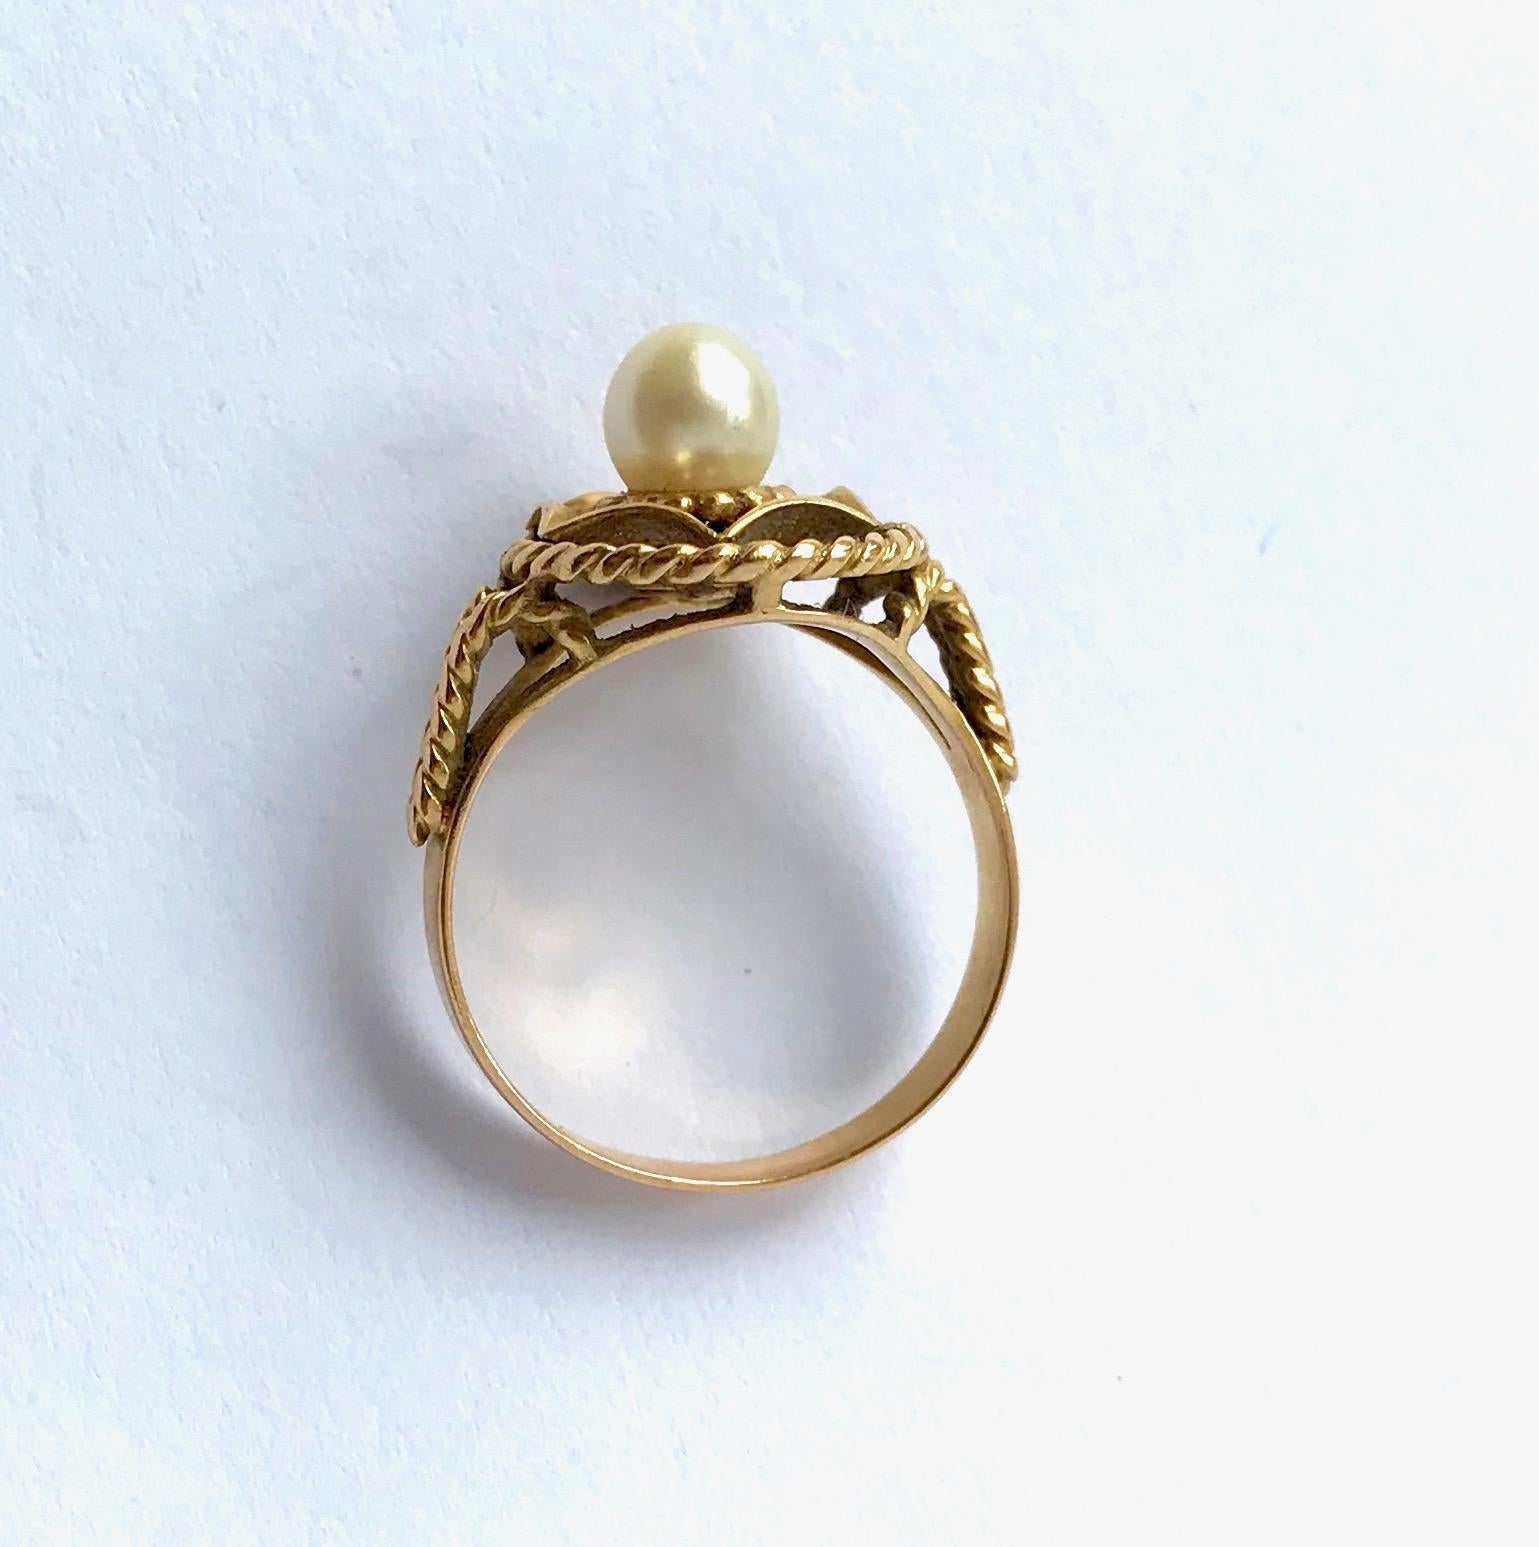 Vintage 18 kt yellow gold ring and a pearl circa 1960
A cultured pearl diameter 5 mm in the center of a basket. 
Twist work on the basket and top of the ring. Very good general condition for this vintage jewel.
Eagle's head hallmark (750/000 gold)